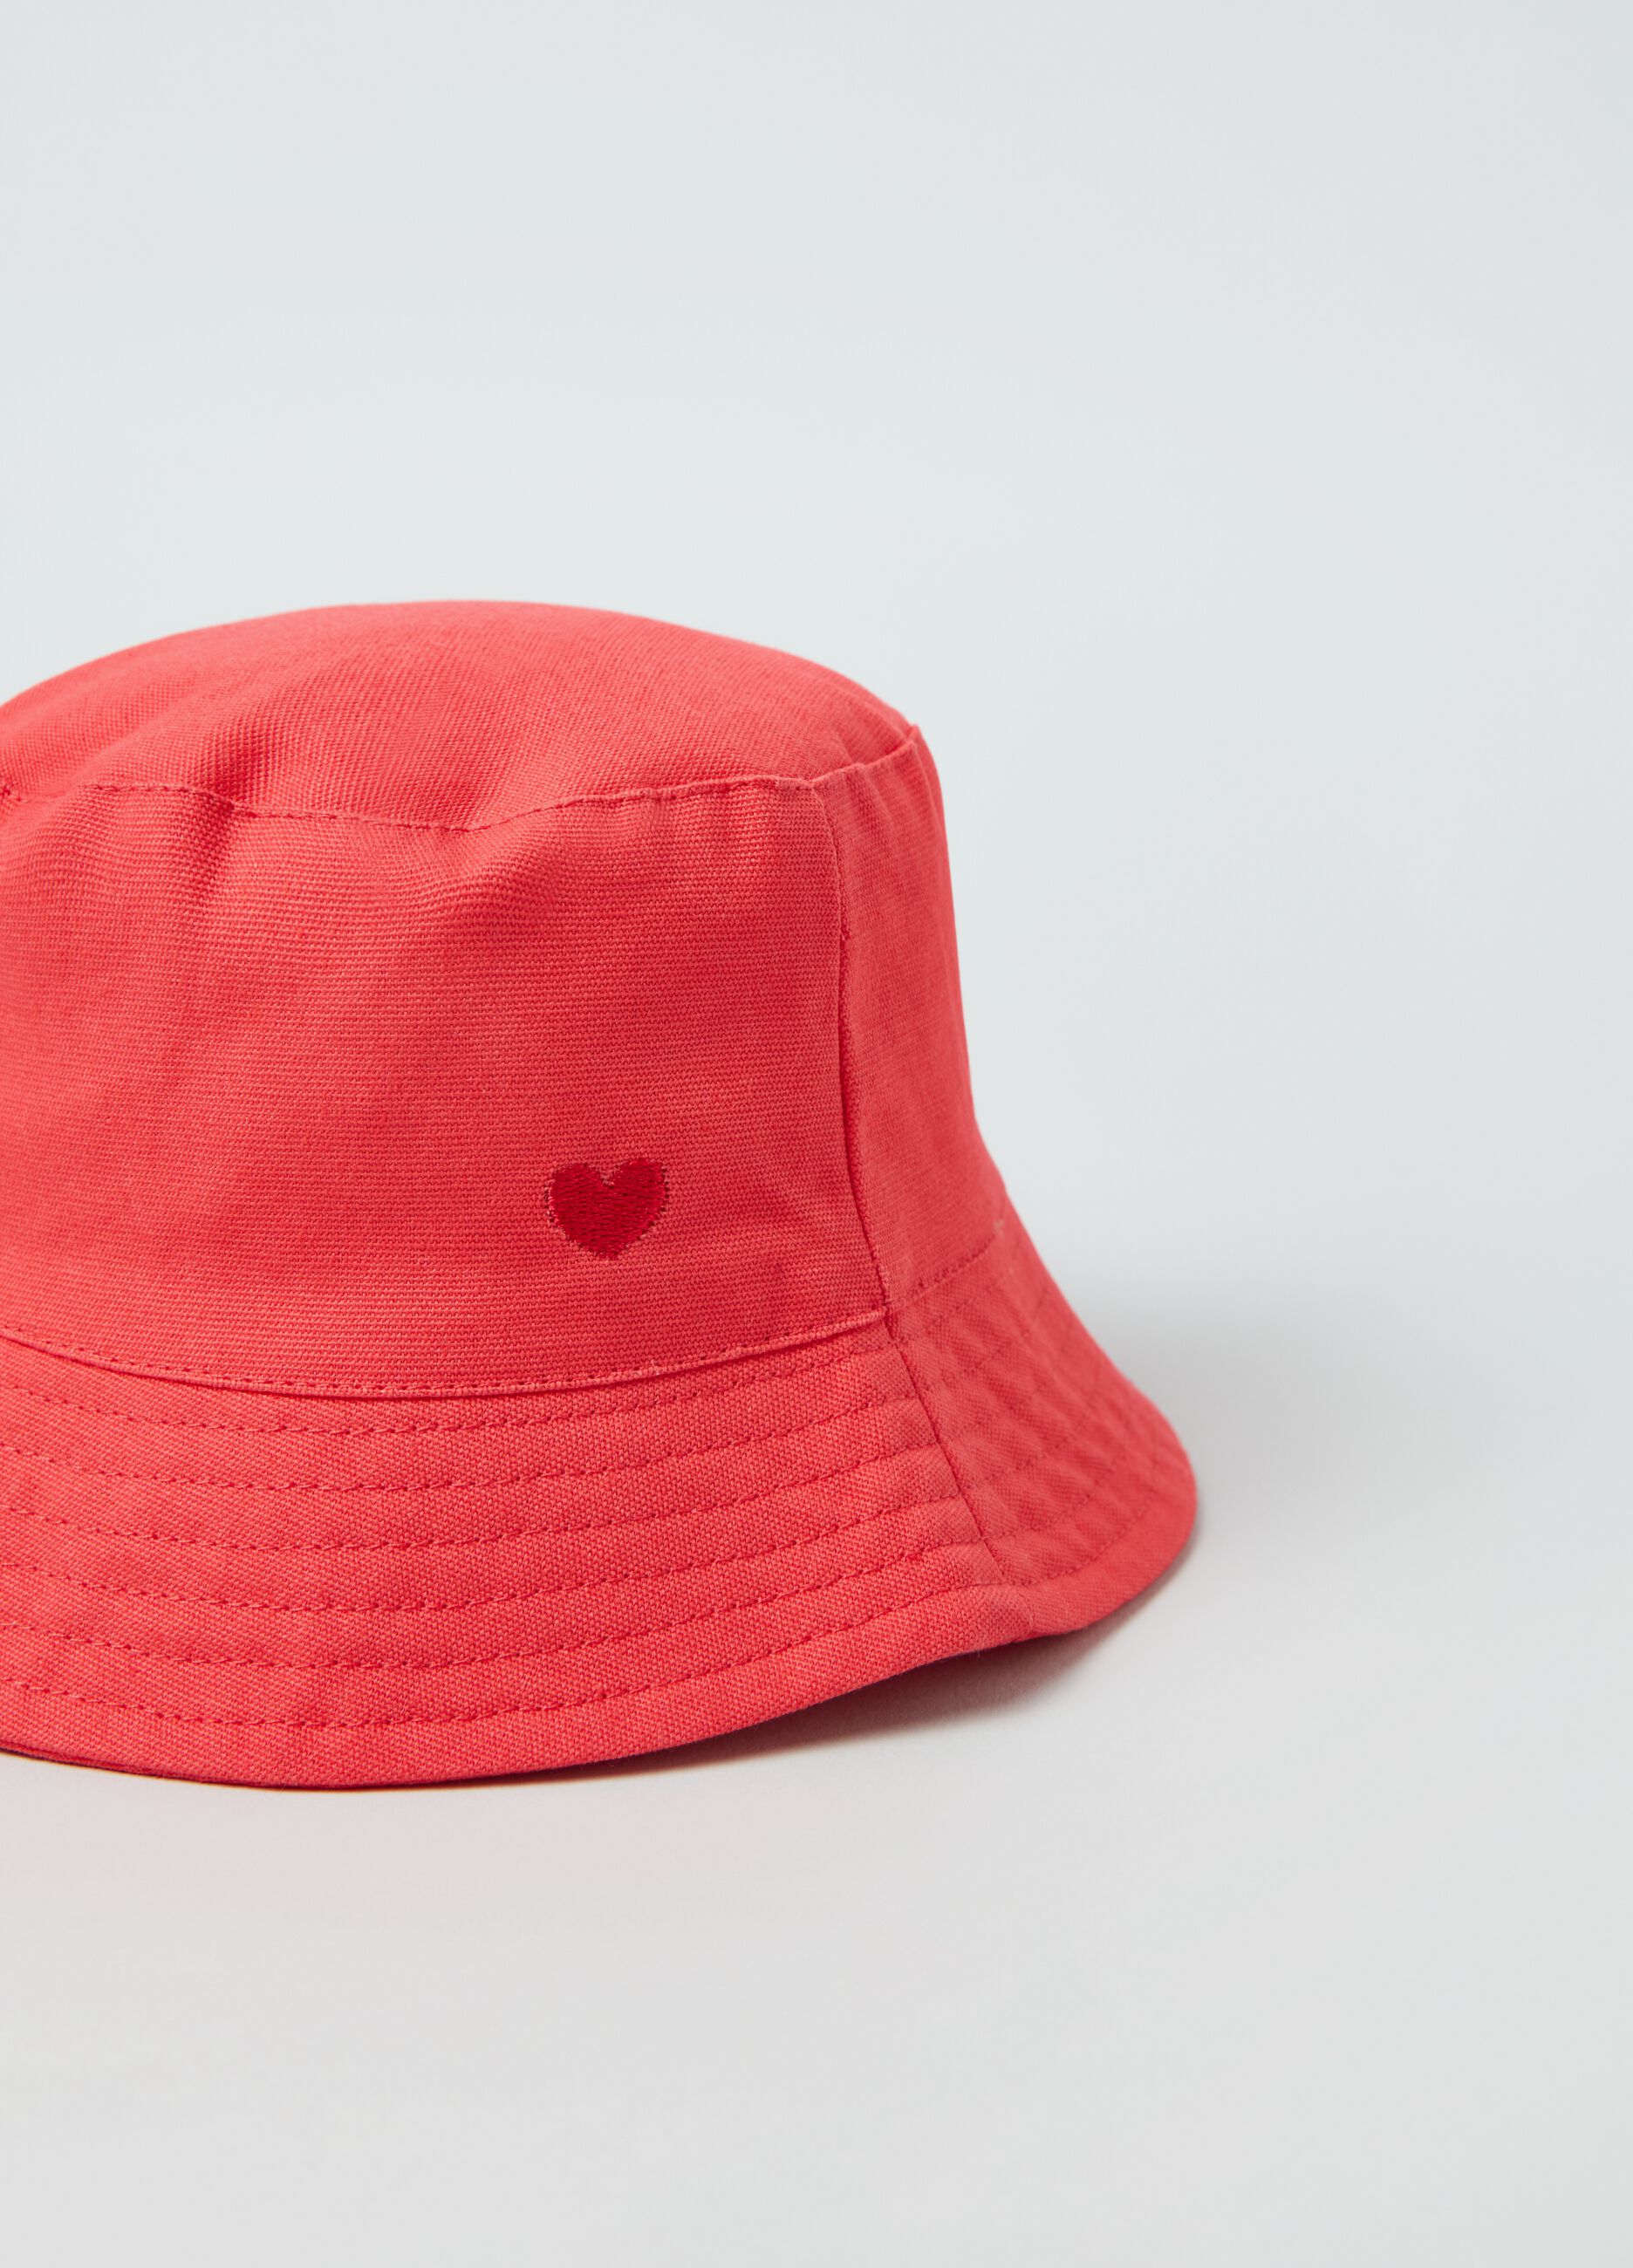 Fishing hat with heart embroidery